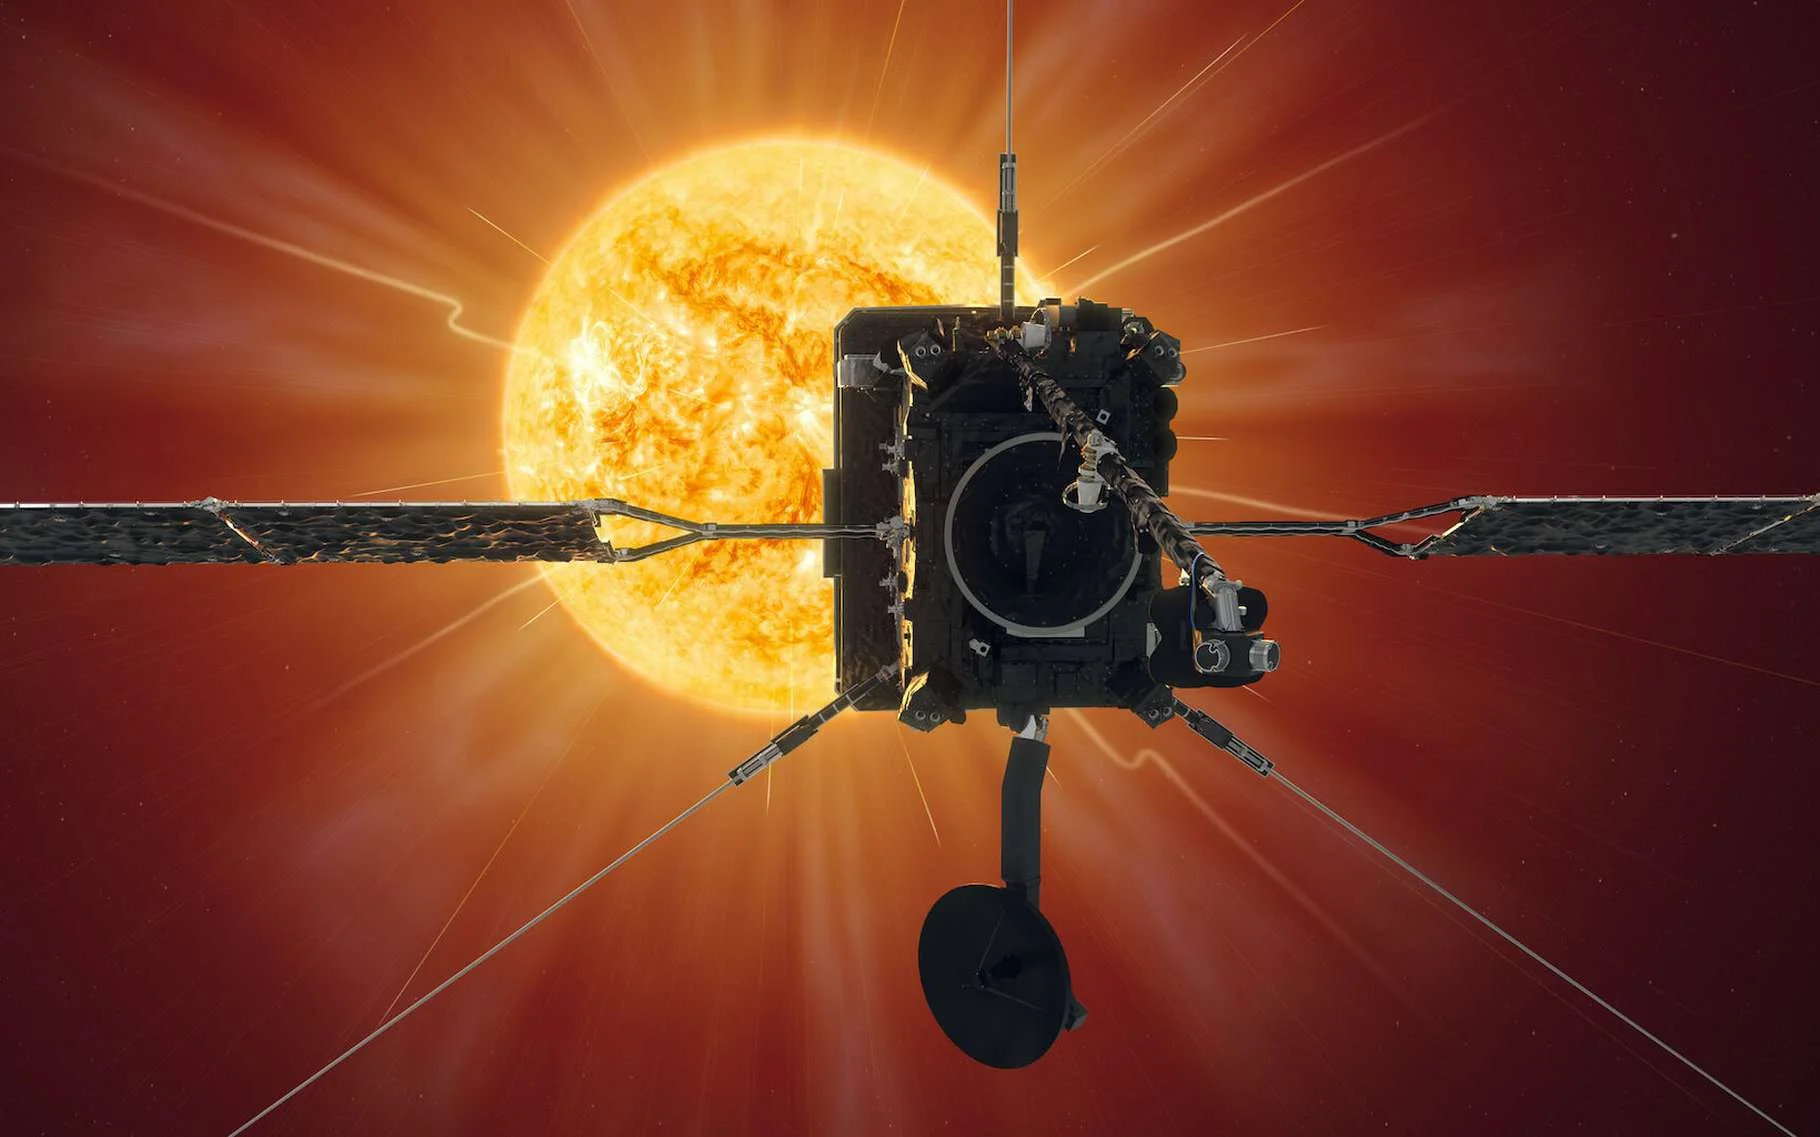 The probe received images of the Sun at an extremely close distance